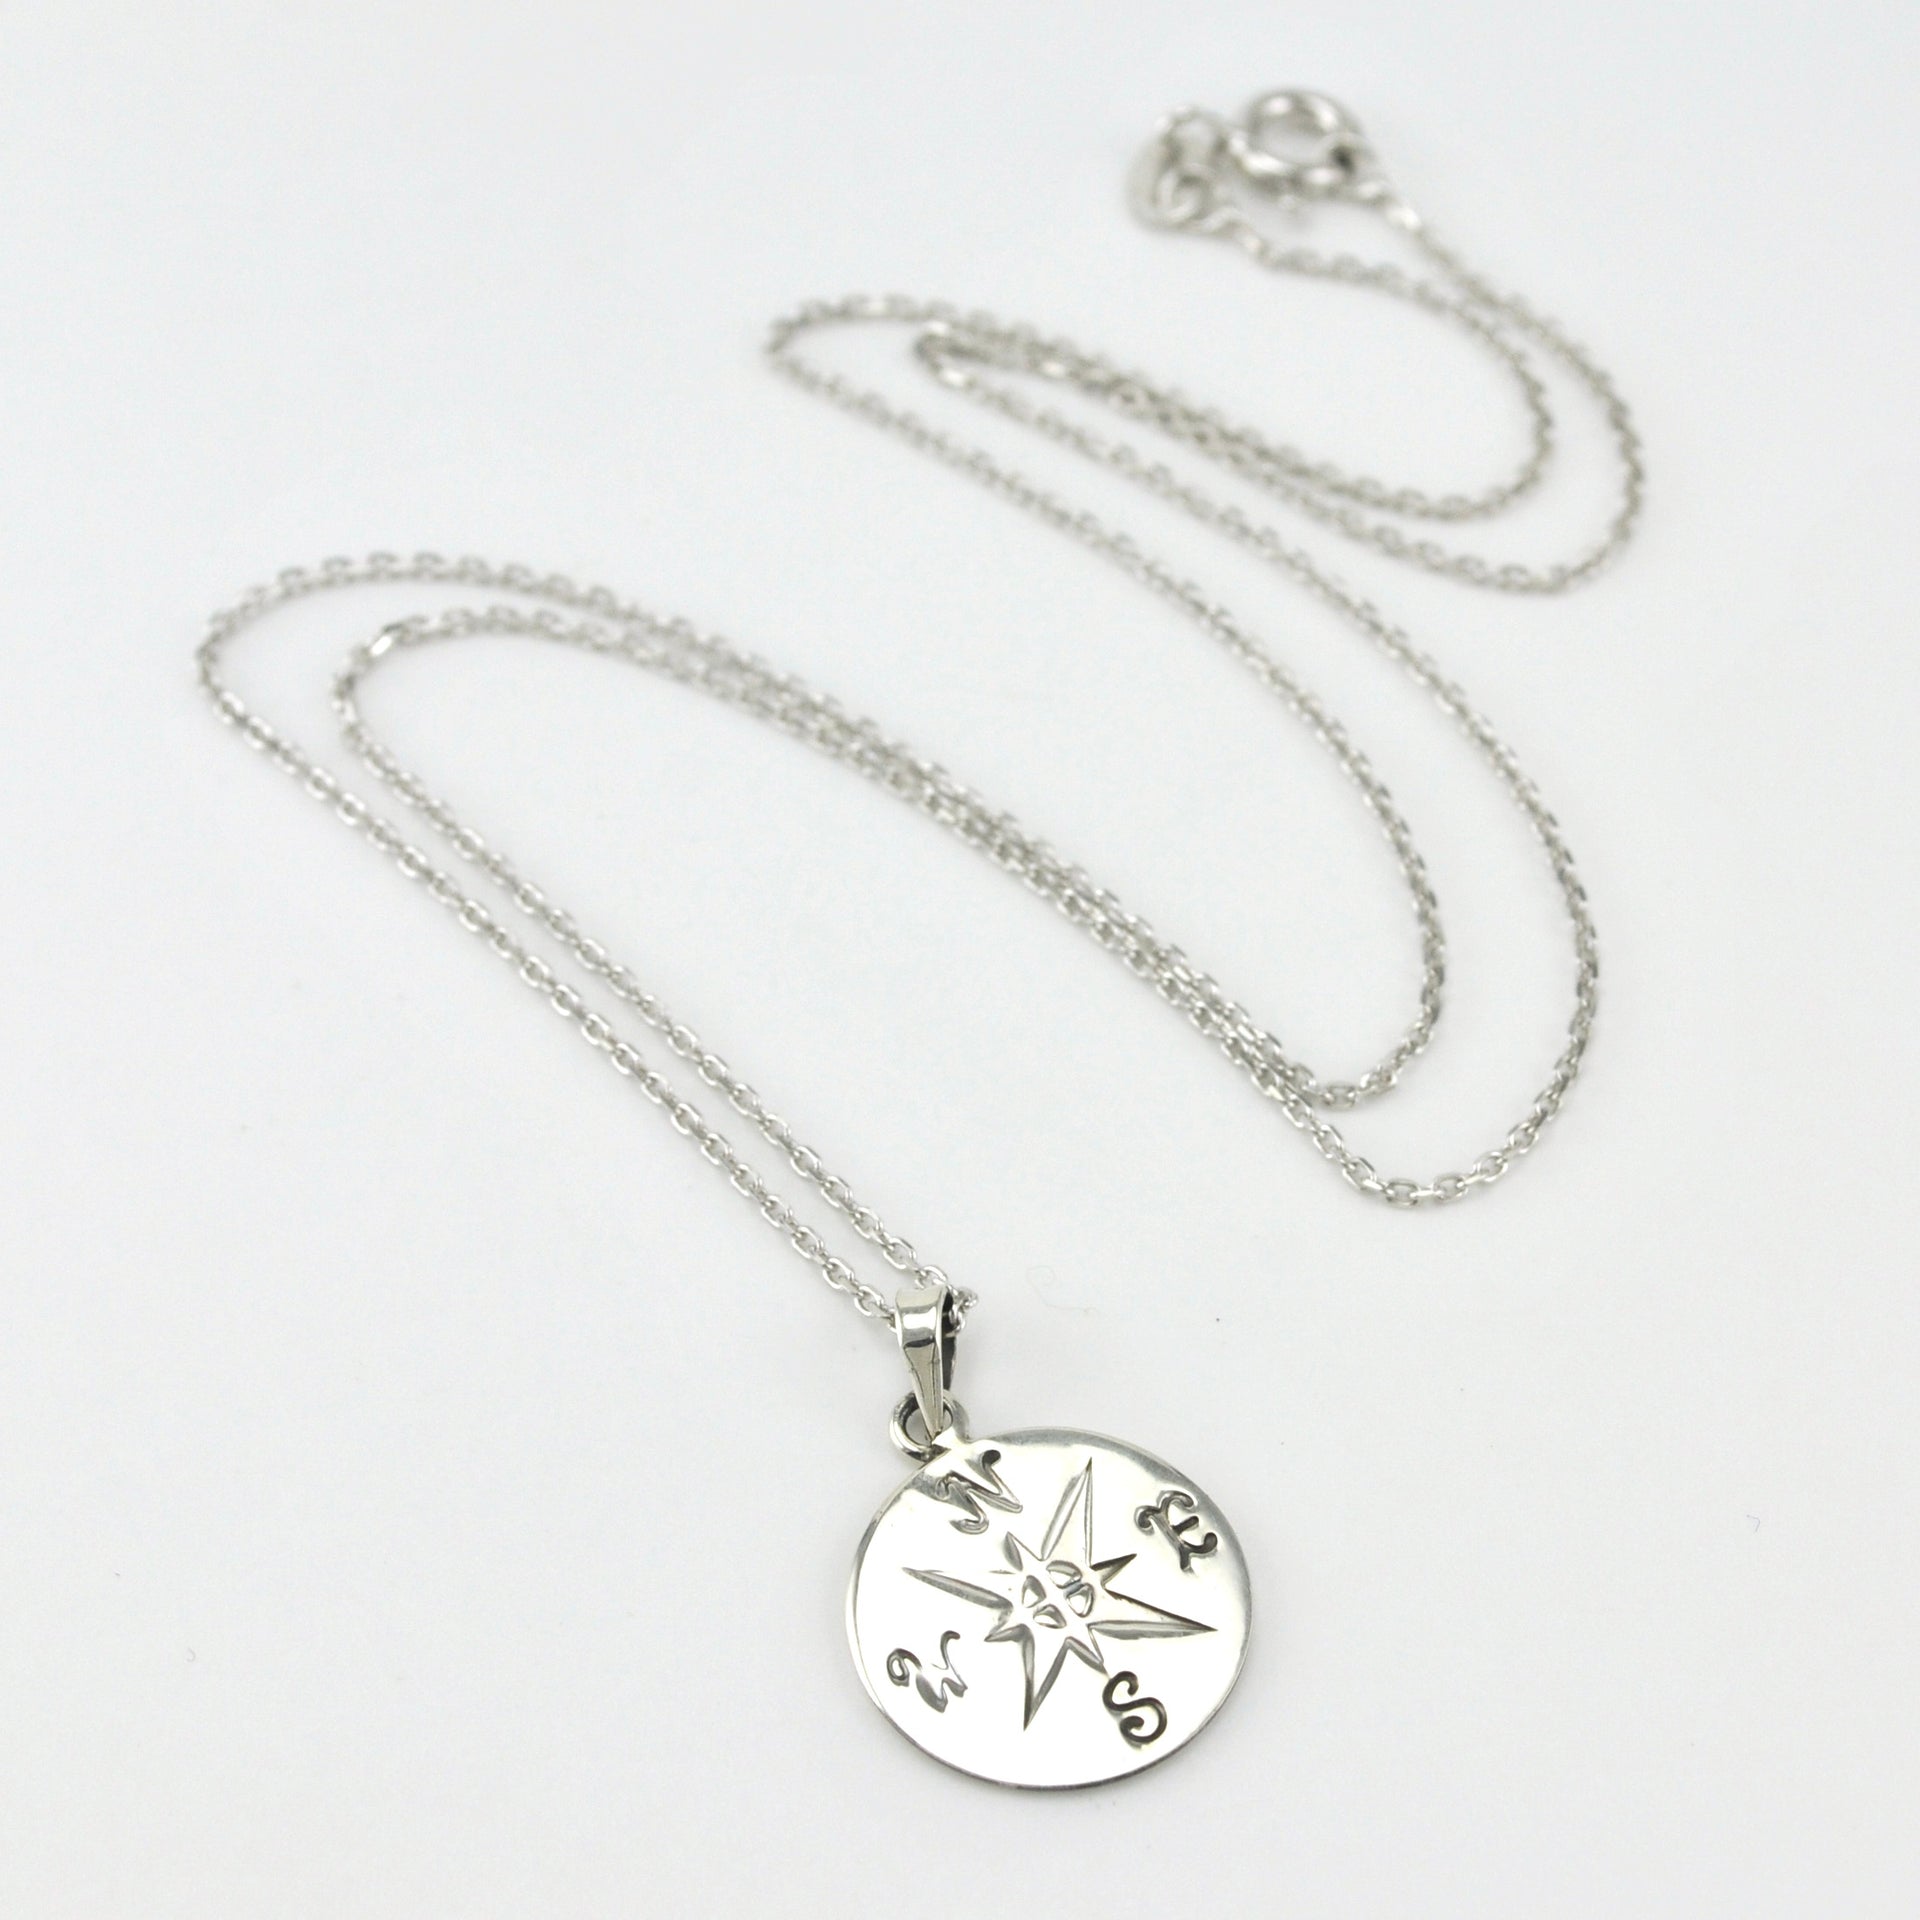 Sterling Silver Compass Necklace